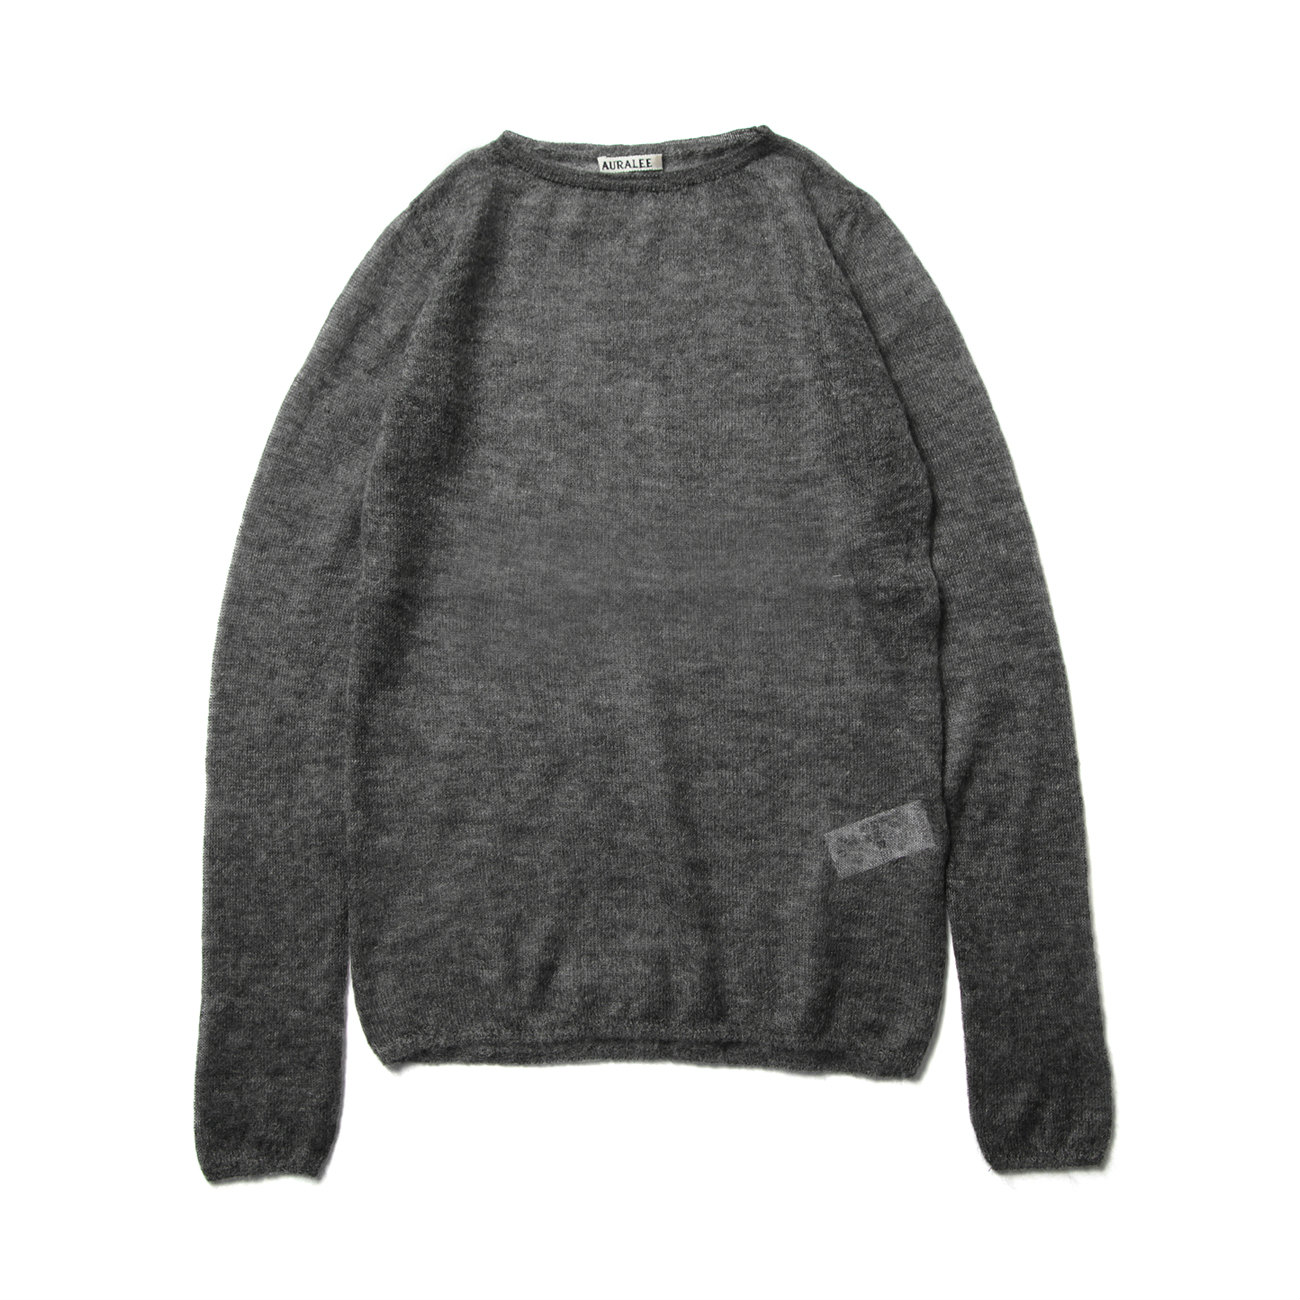 KID MOHAIR SHEER KNIT BOAT NECK P/O (レディース) - Top Charcoal